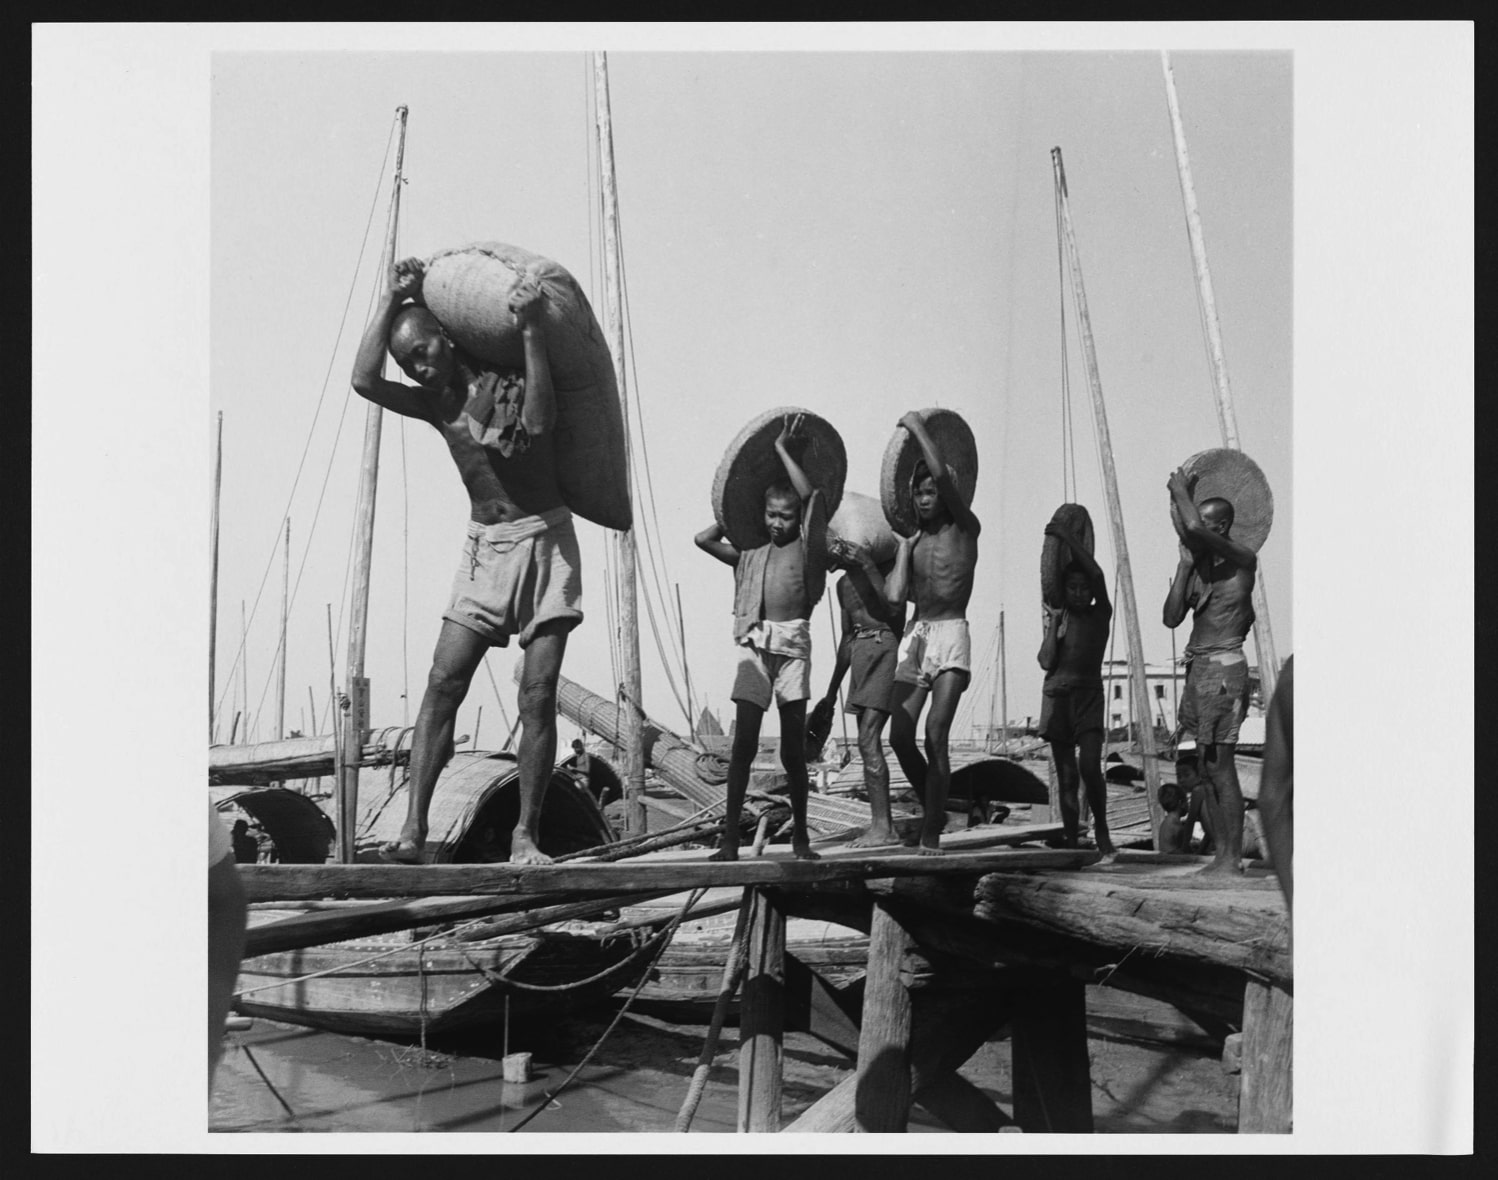 Chaozhou migrants off-loading sacks in Western District, Hong Kong Photo courtesy of Harvard-Yenching Library of the Harvard College Library, Harvard University